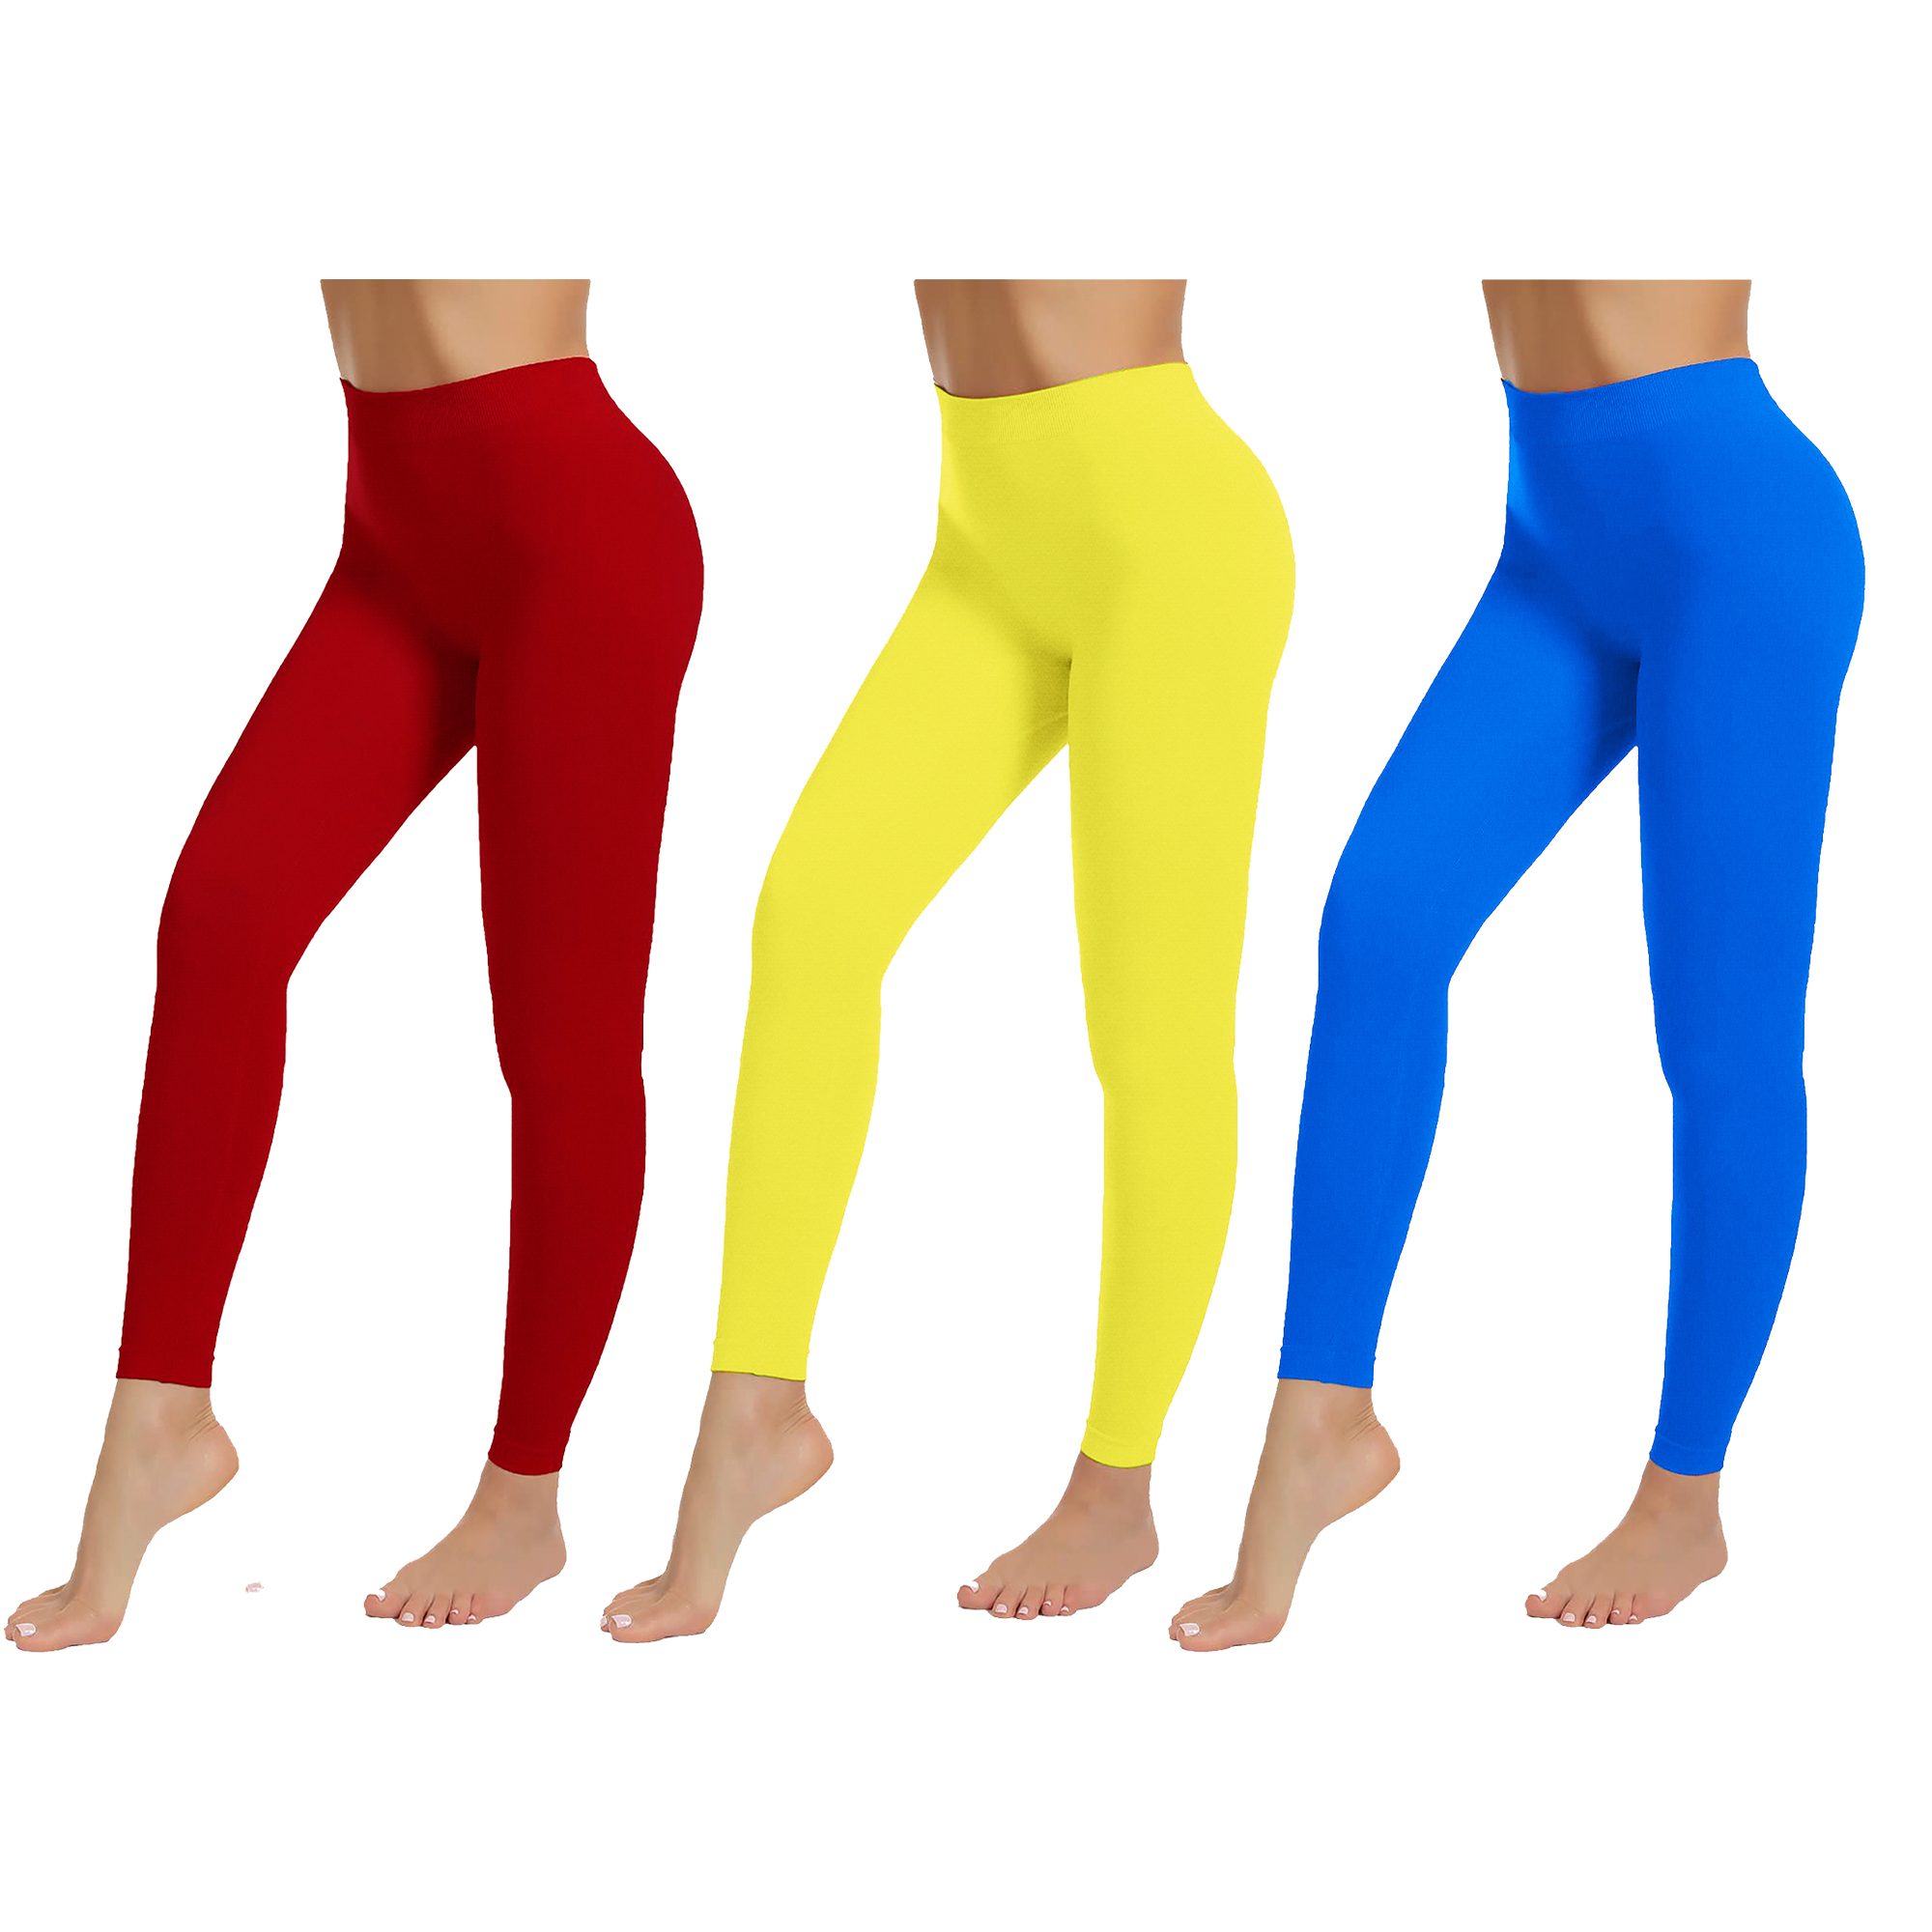 3-Pack: Women's High-Waist Ultra-Soft Stretchy Solid Fitness Yoga Leggings Pants - YELLOW, L